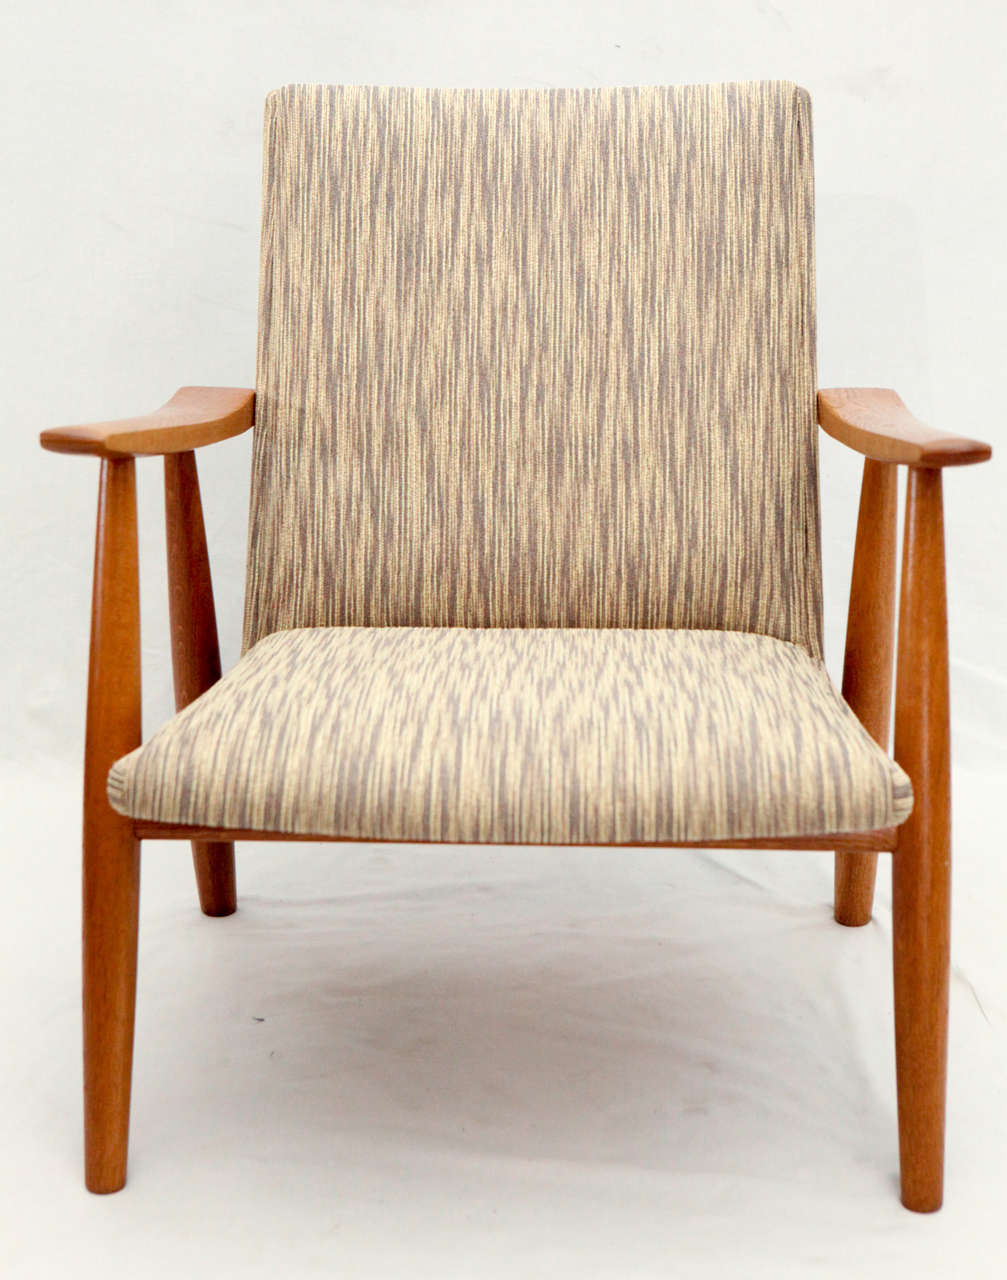 Hans Wegner GE-260 Lounge chair designed. In 1950 and produced by GETAMA.  Store formerly known as ARTFUL DODGER INC